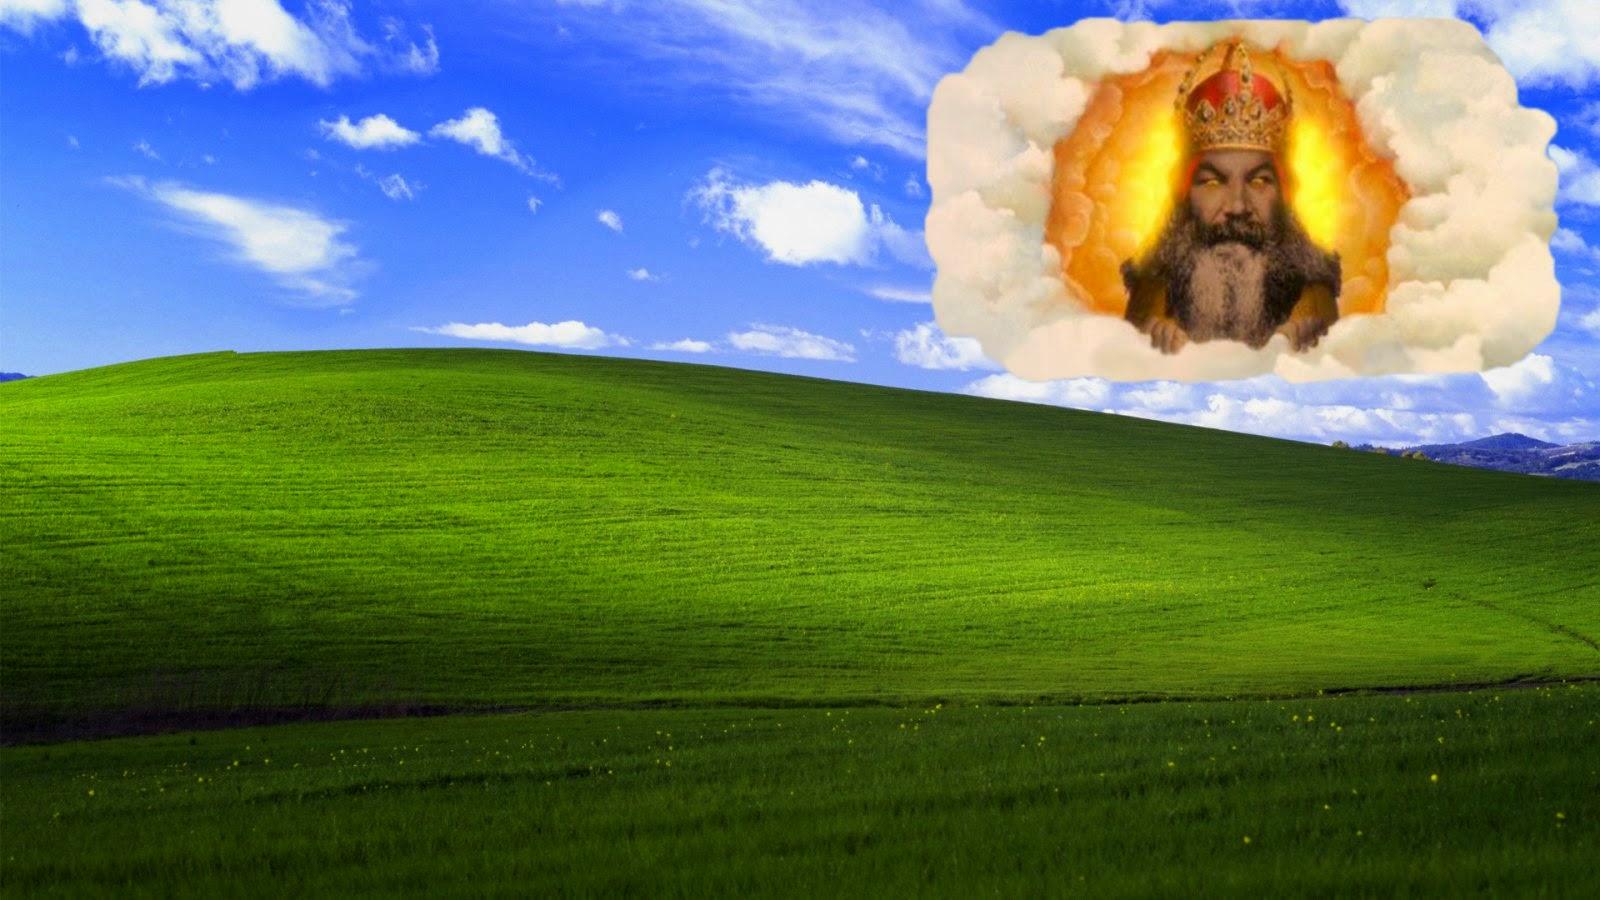 Day Seizures: Monty Python and the Holy Grail Windows